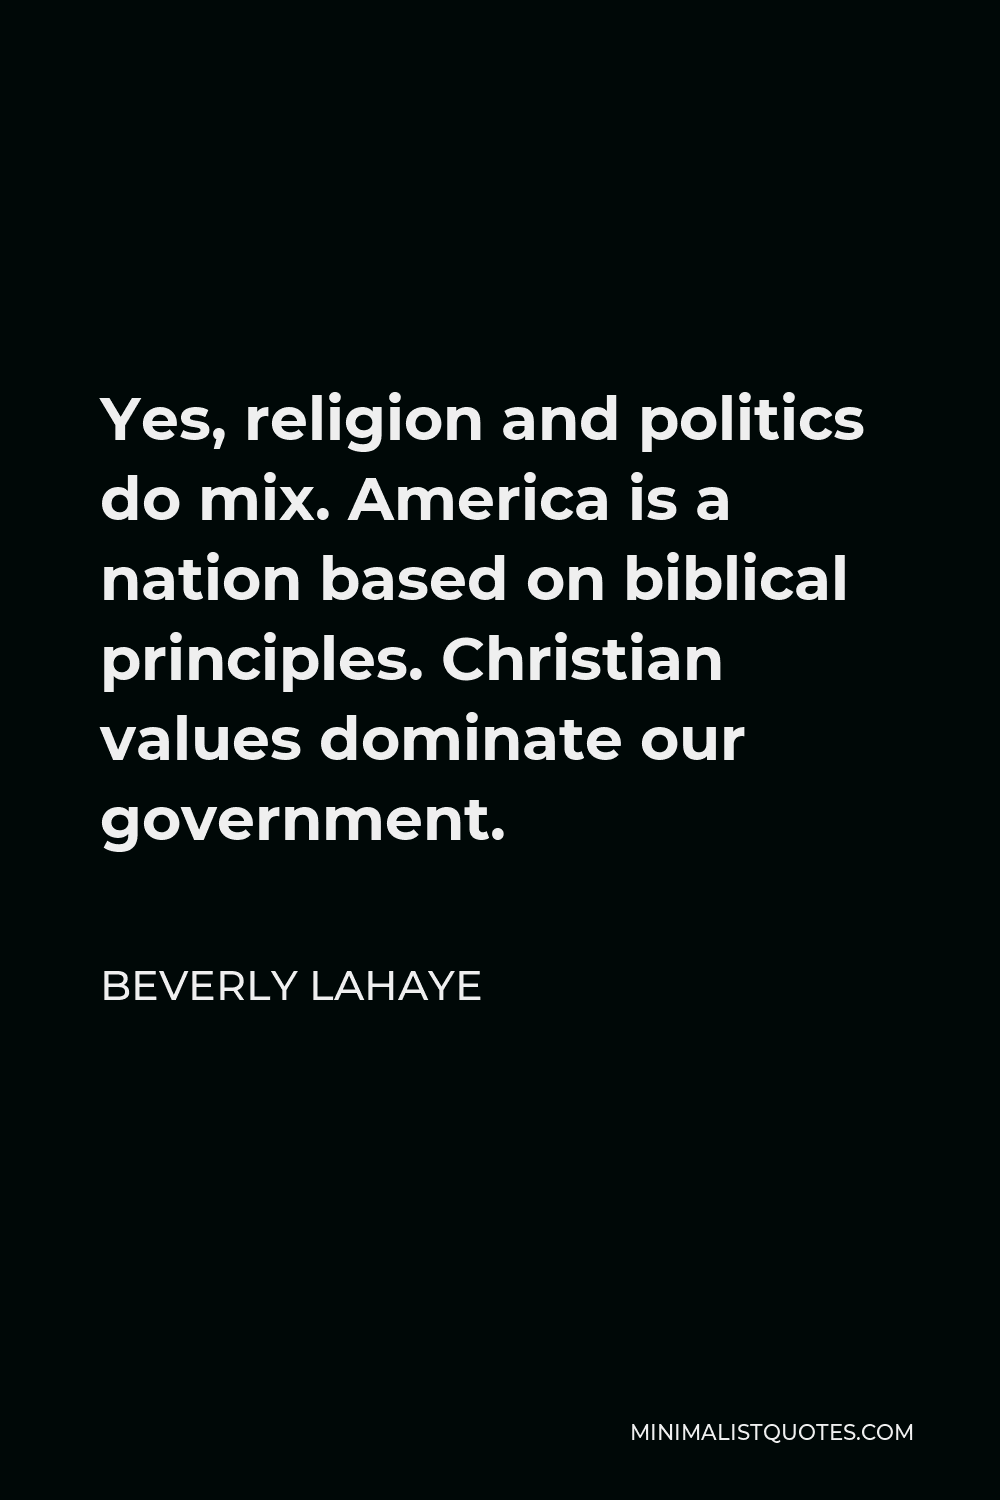 Beverly LaHaye Quote - Yes, religion and politics do mix. America is a nation based on biblical principles. Christian values dominate our government.